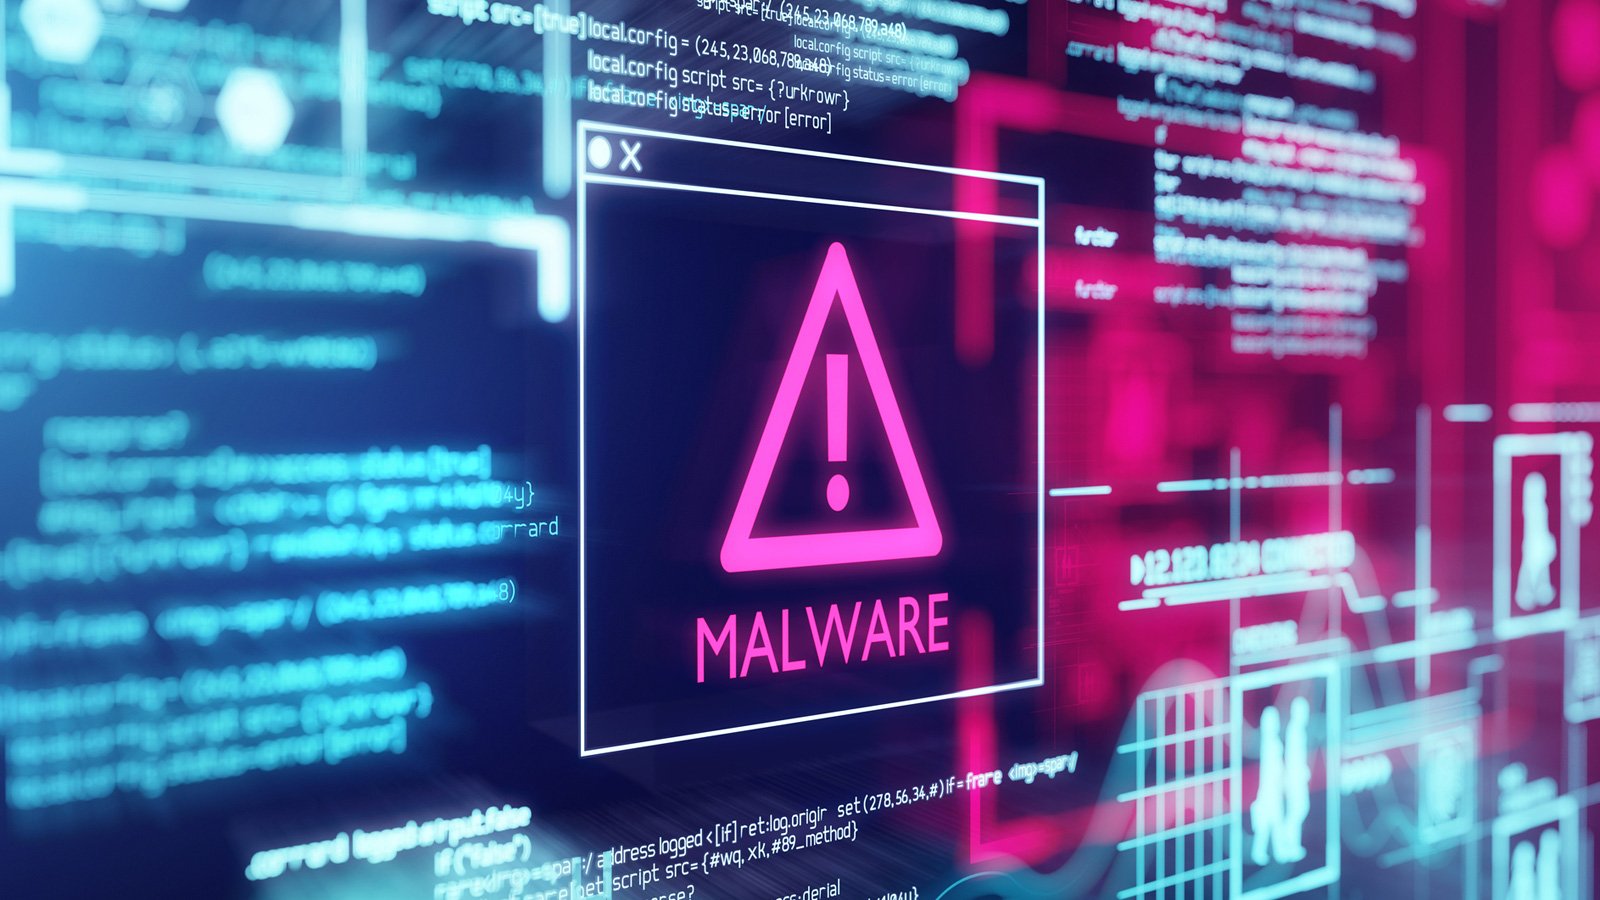 Hackers abuse Google Ads to spread malware in legit software